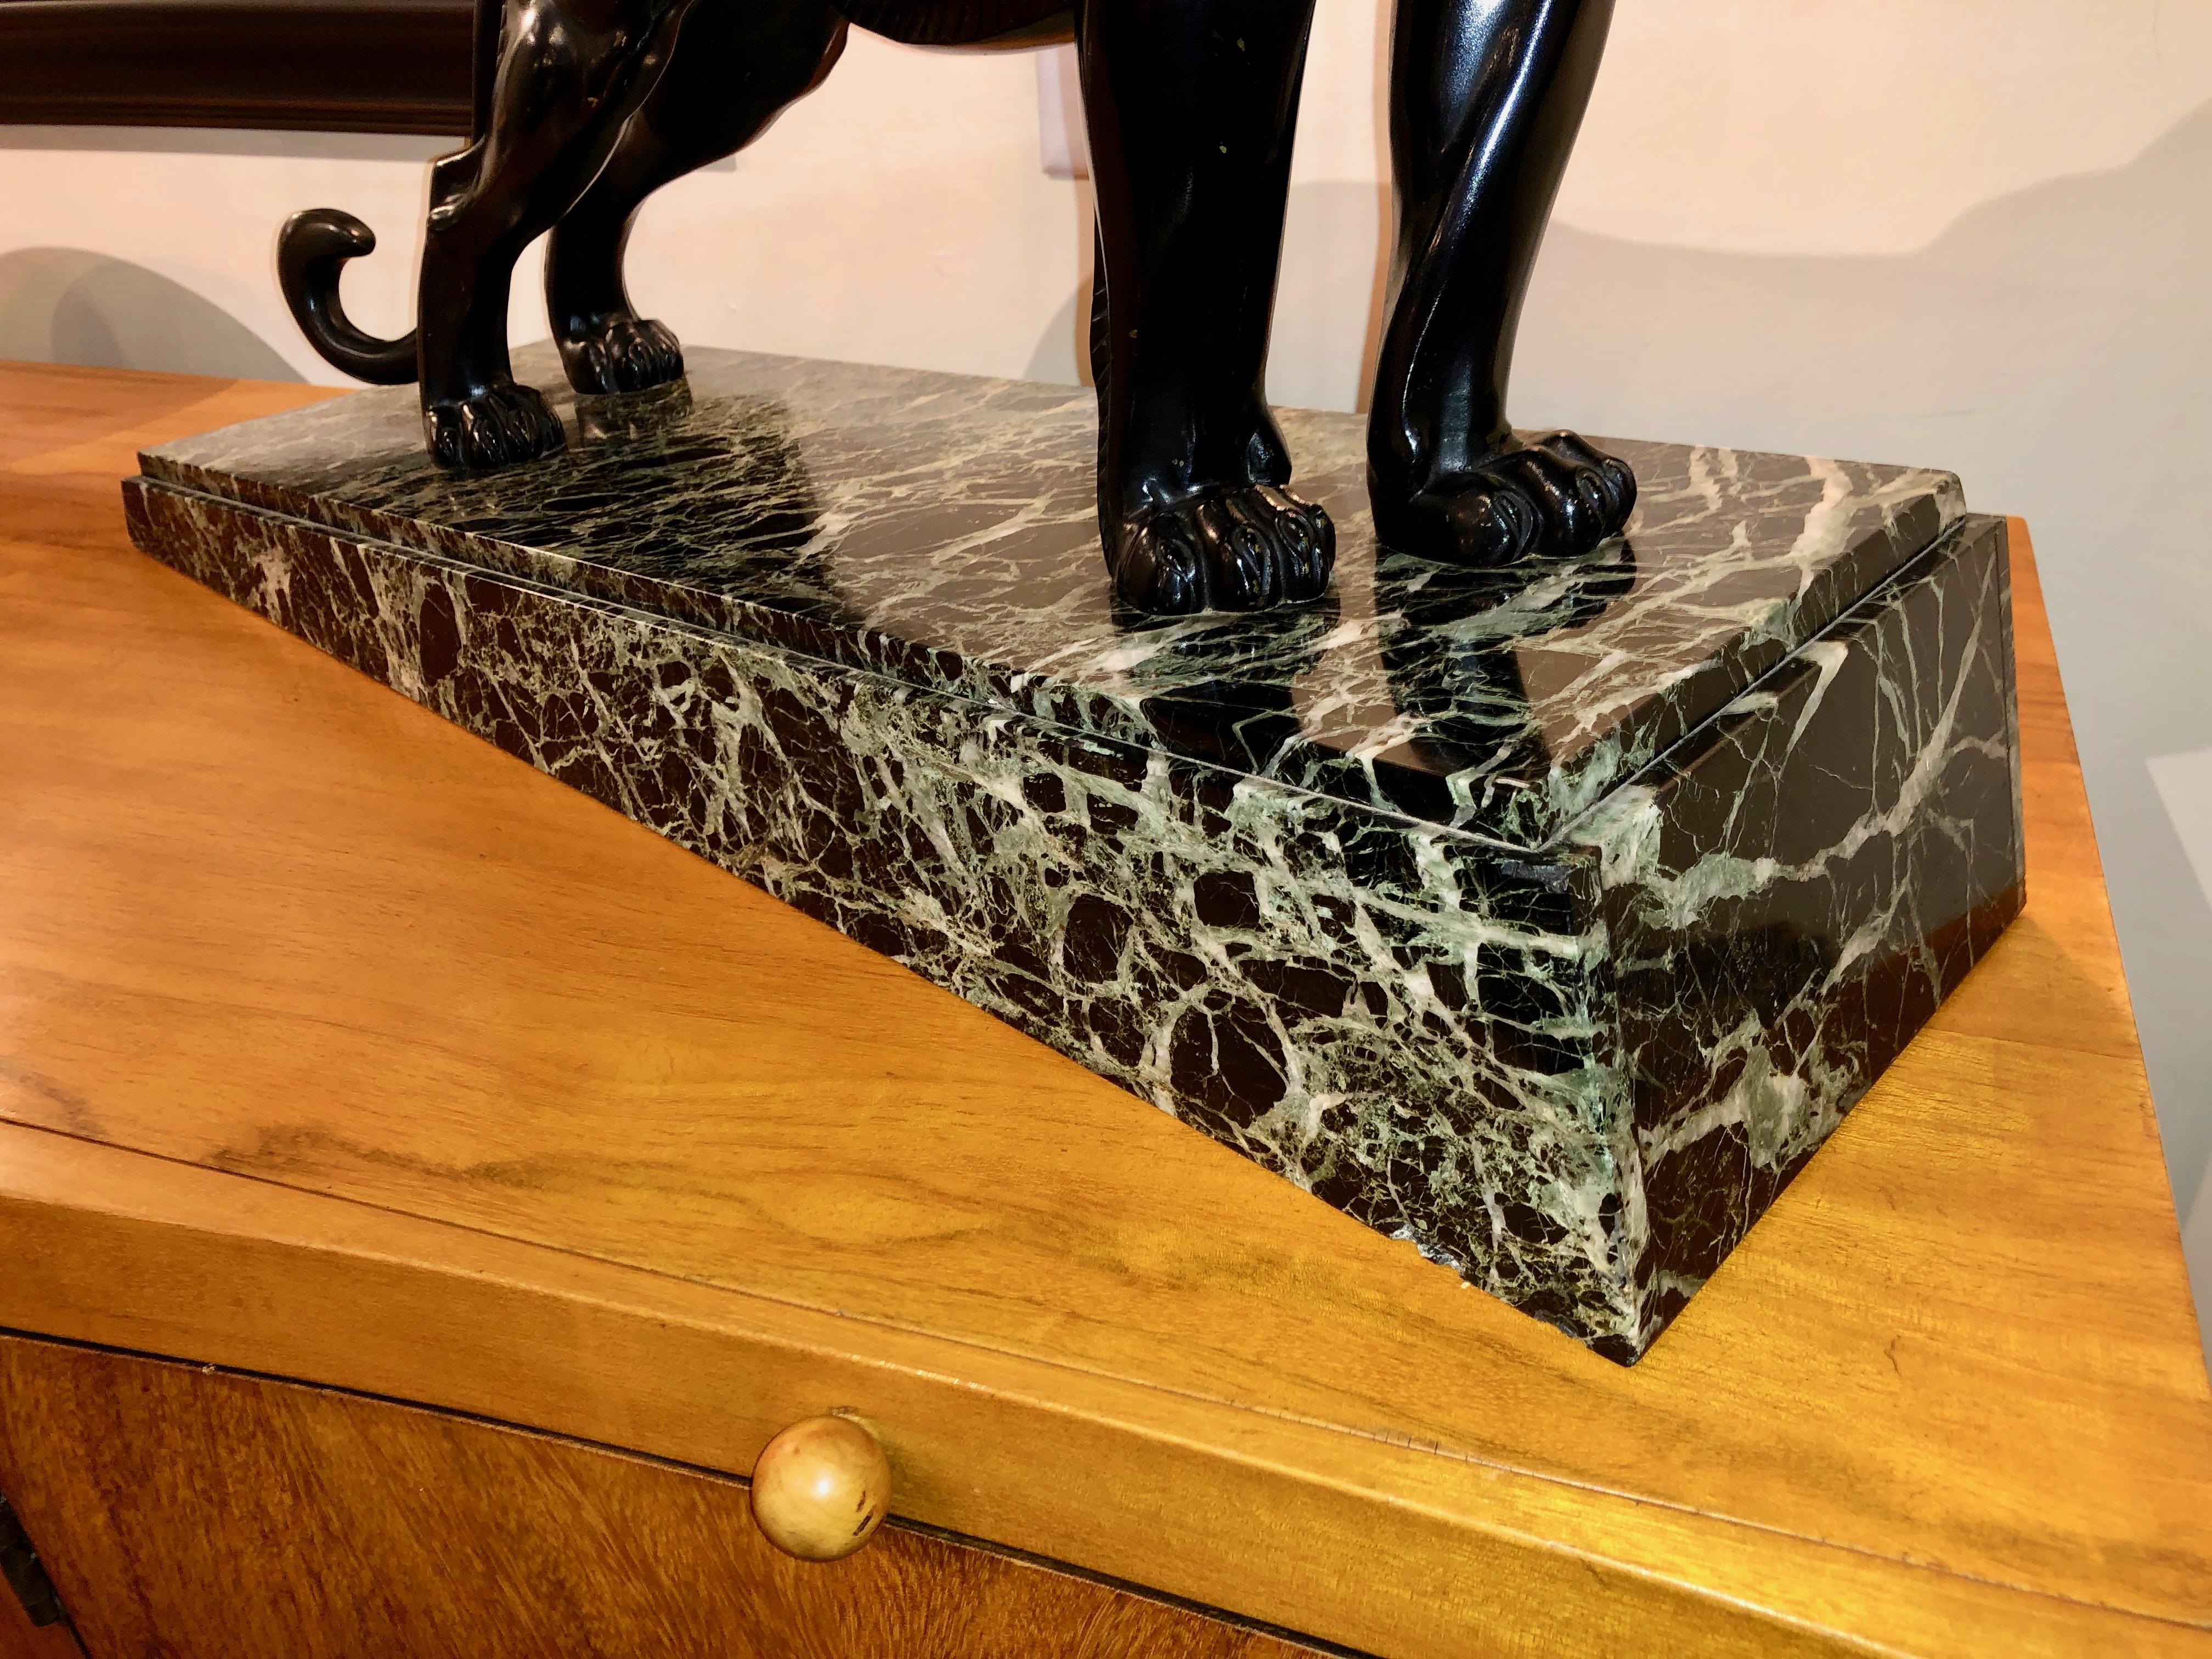 L. Carvin Black Panther Art Deco Bronze Sculpture In Good Condition For Sale In Oakland, CA